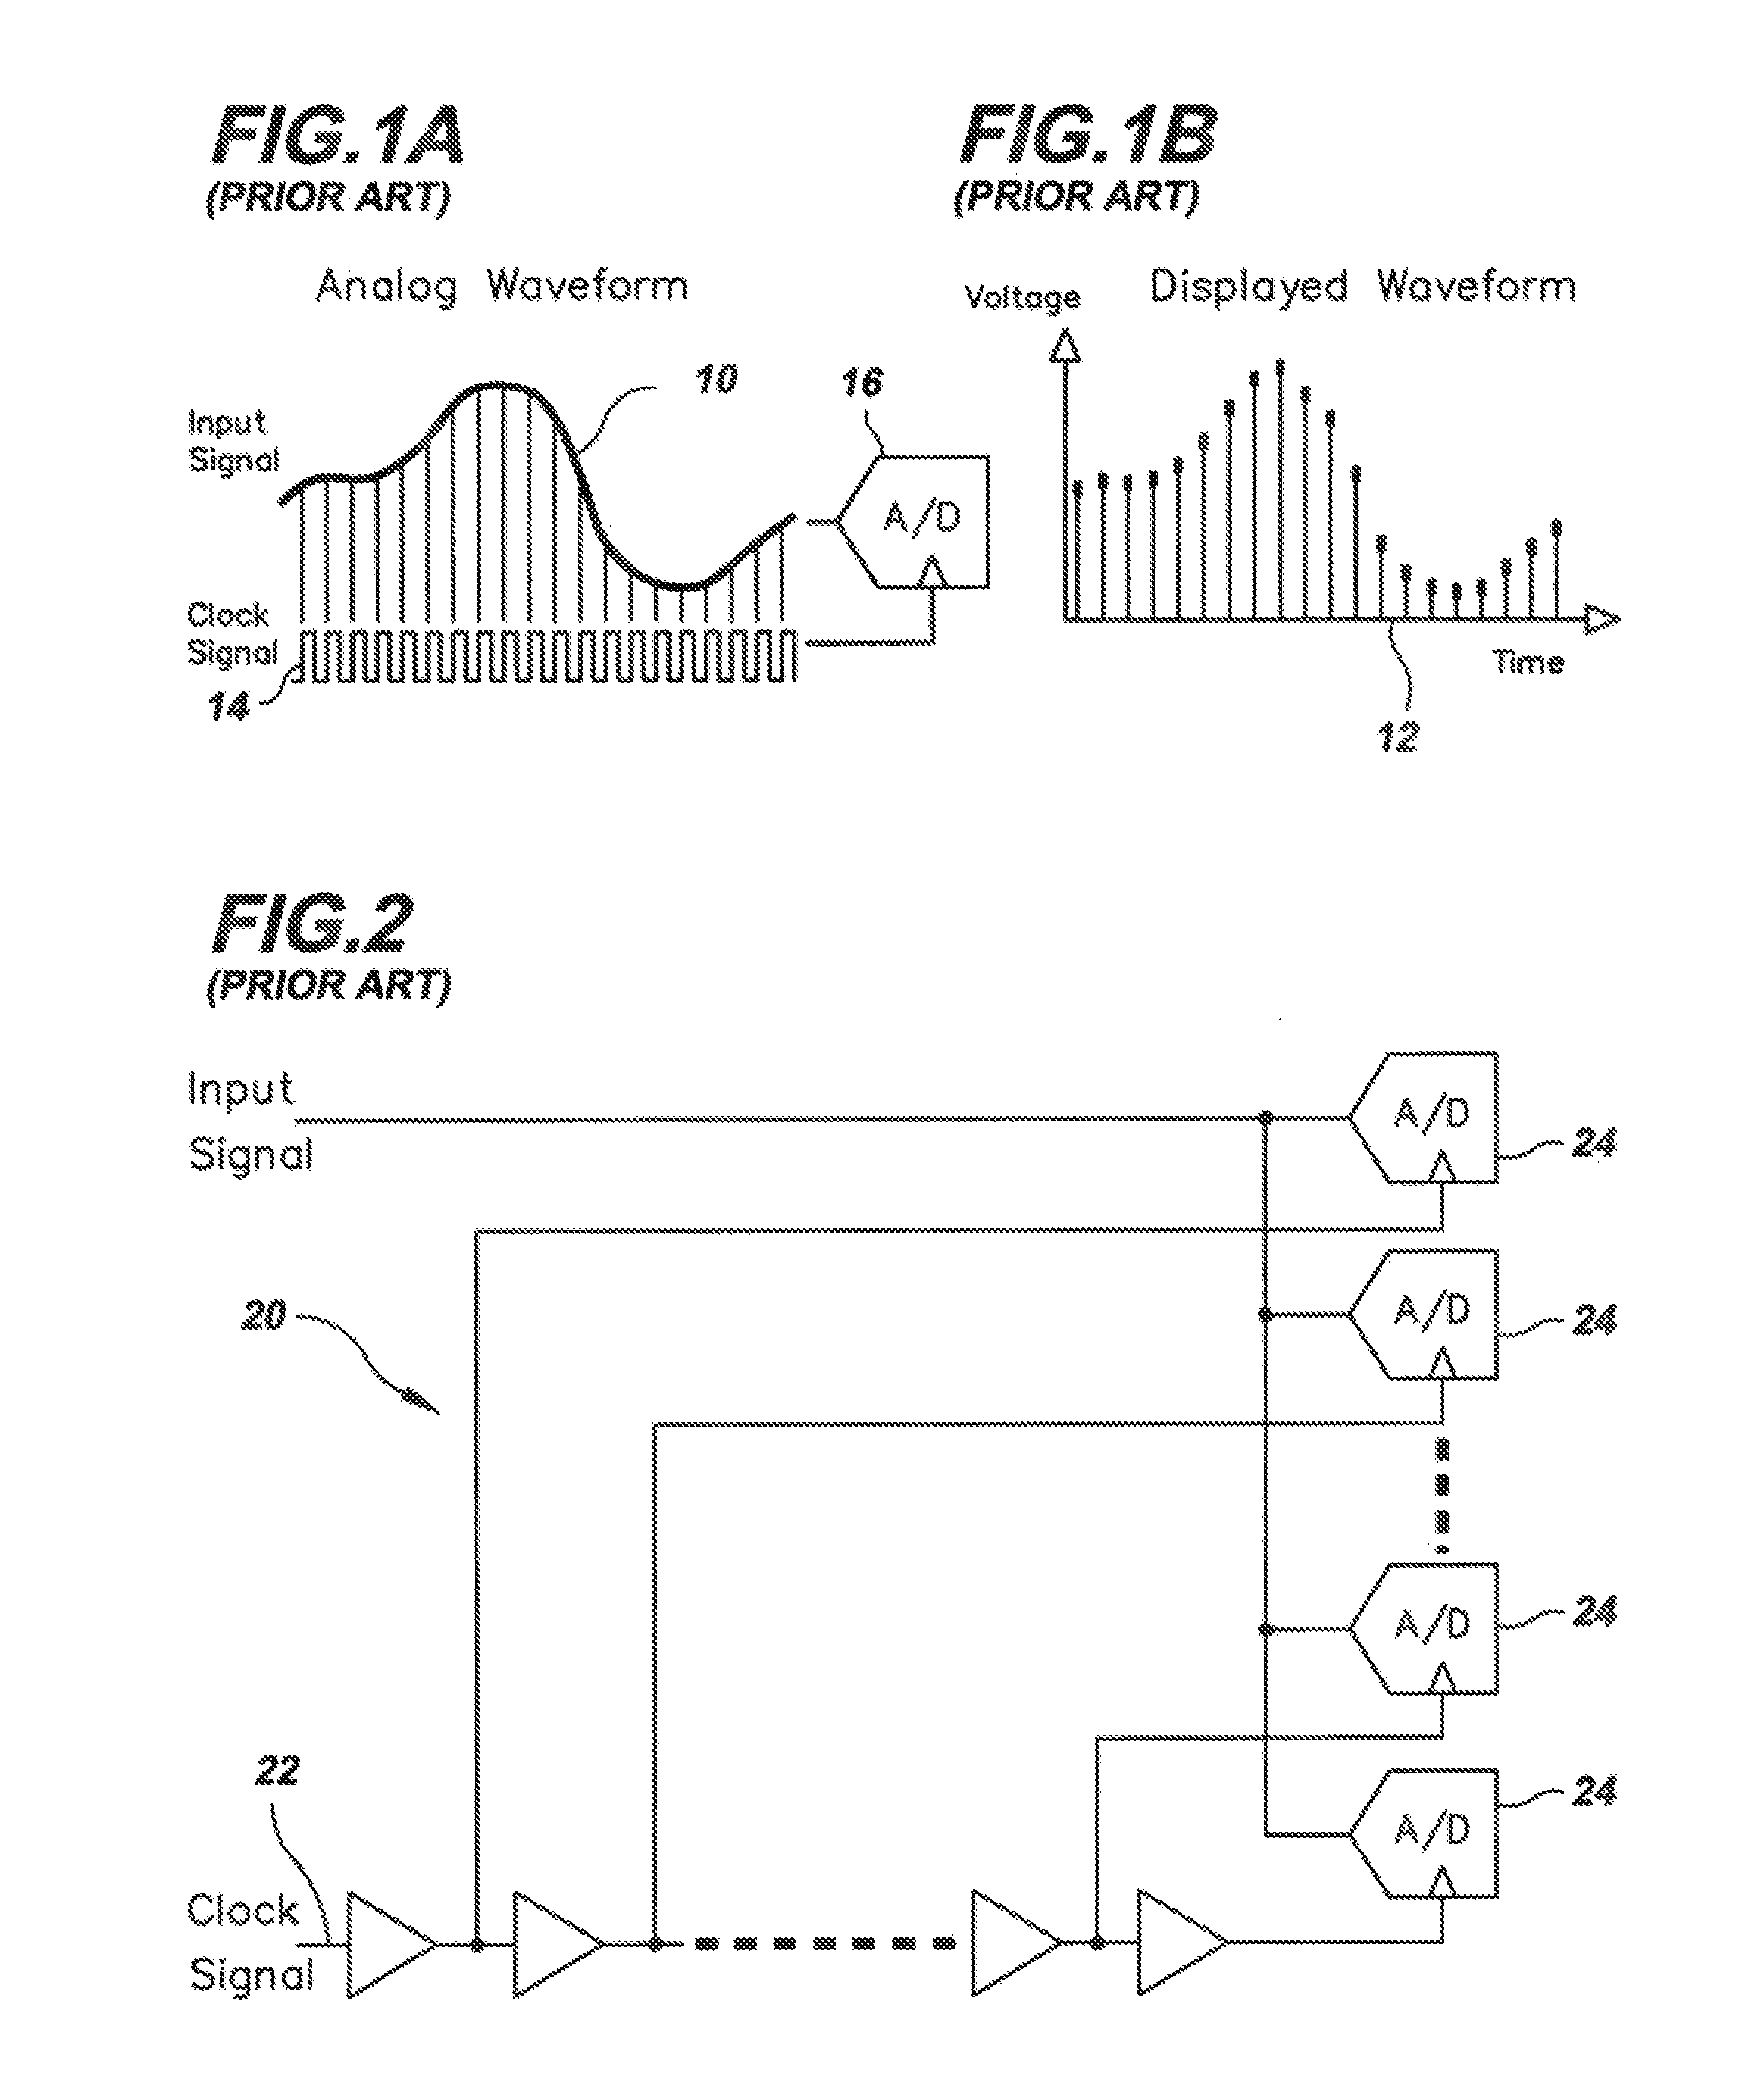 Signal integrity measurement systems and methods using a predominantly digital time-base generator